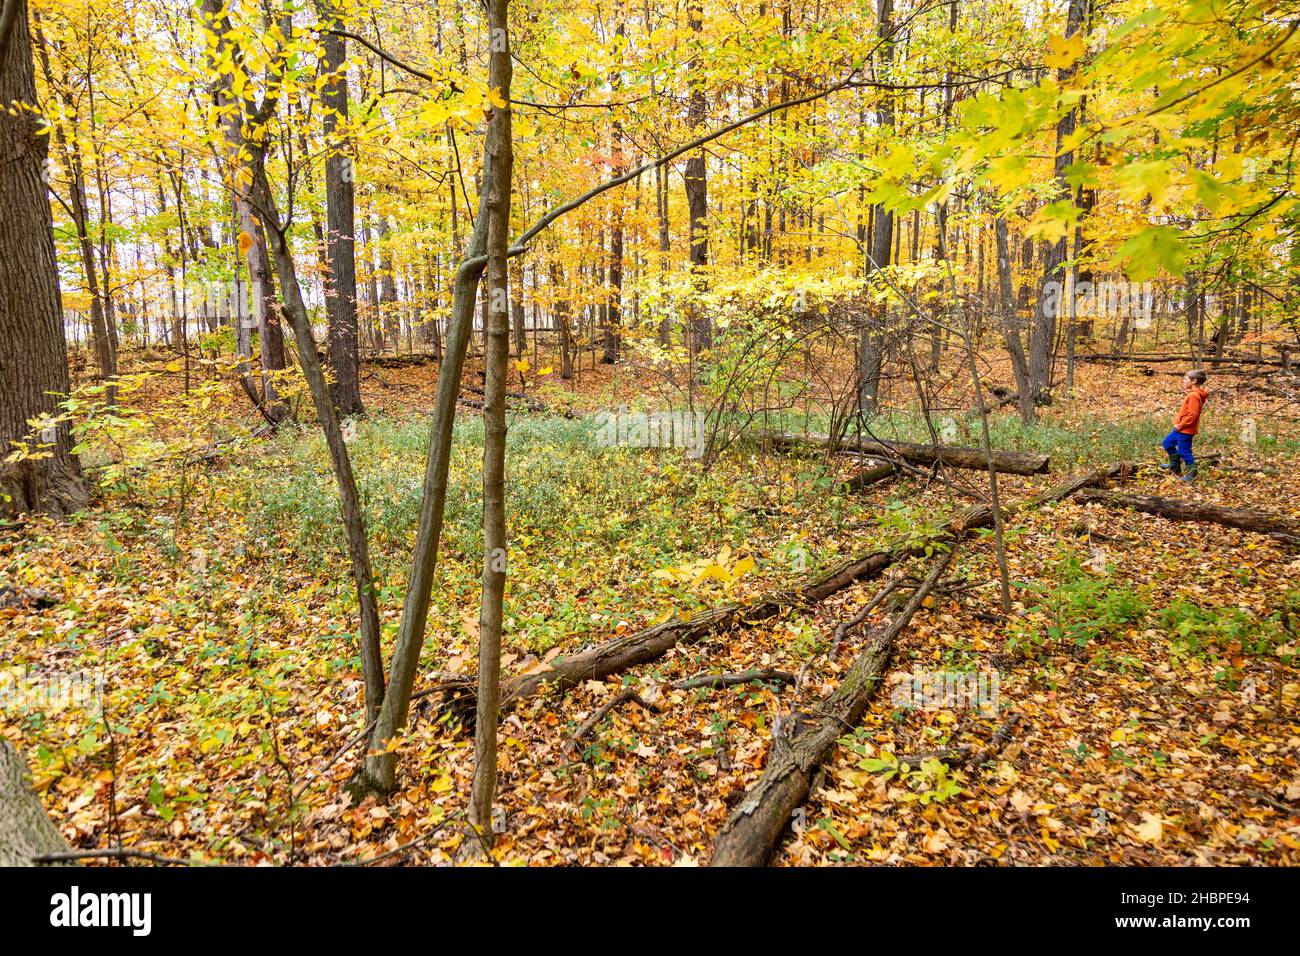 A young boy explores the woods near his DeKalb County, Indiana home in Autumn. Stock Photo